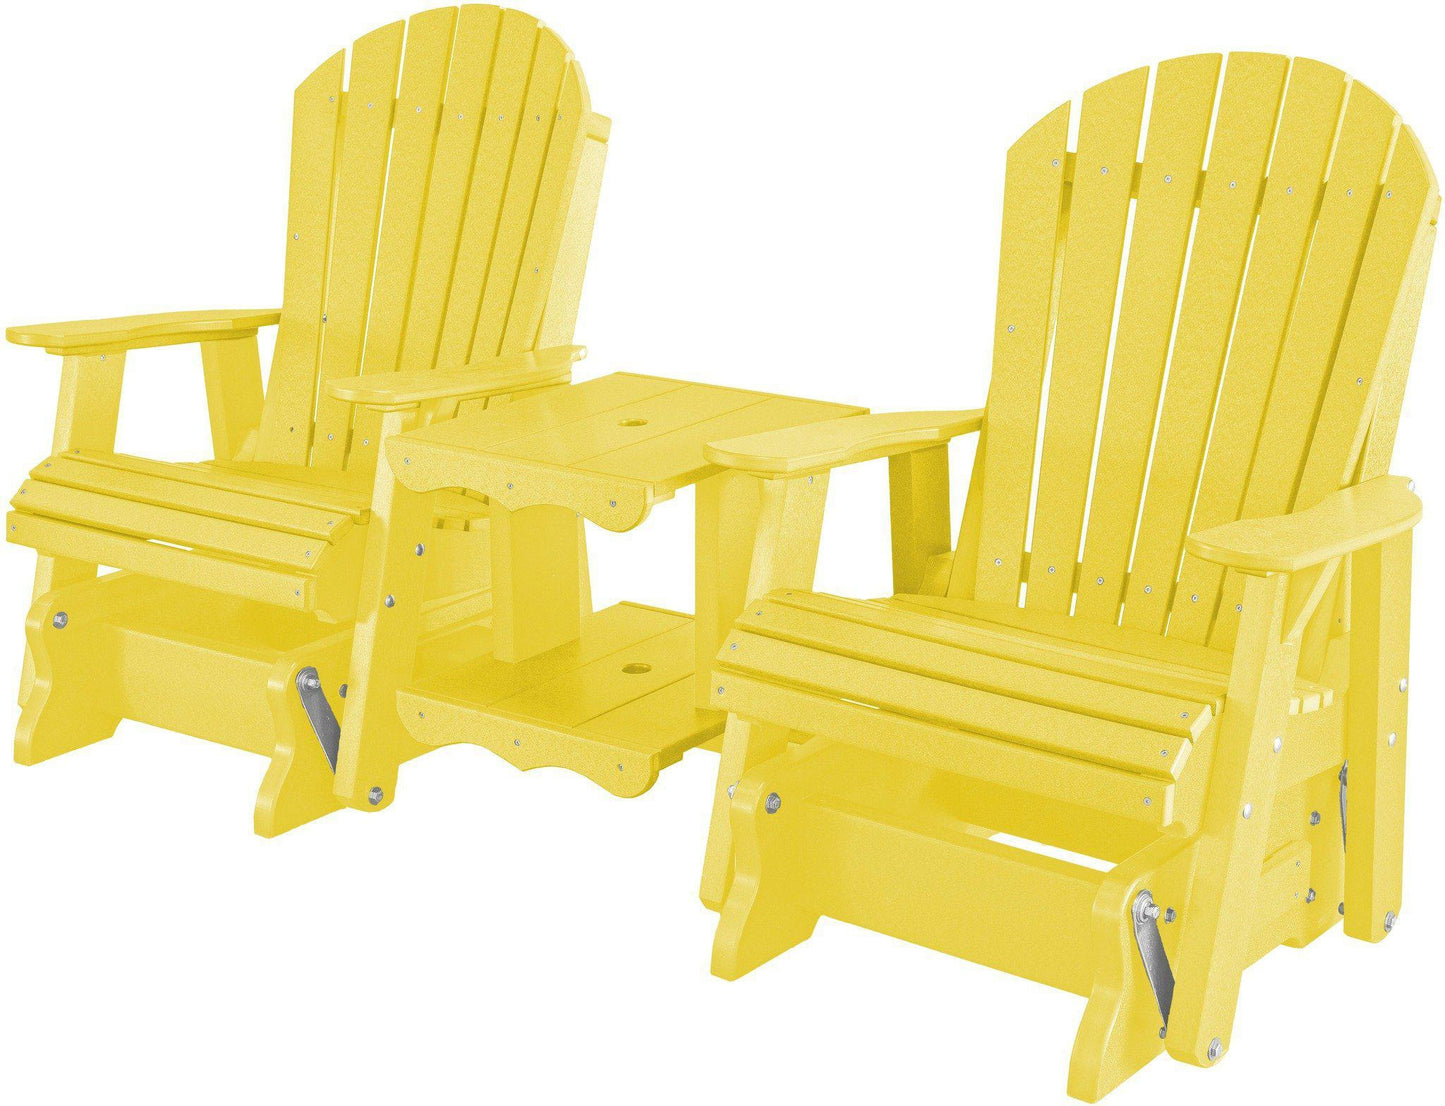 Wildridge Recycled Plastic Heritage Rock-A-Tee Double Seat Adirondack Glider - LEAD TIME TO SHIP 6 WEEKS OR LESS